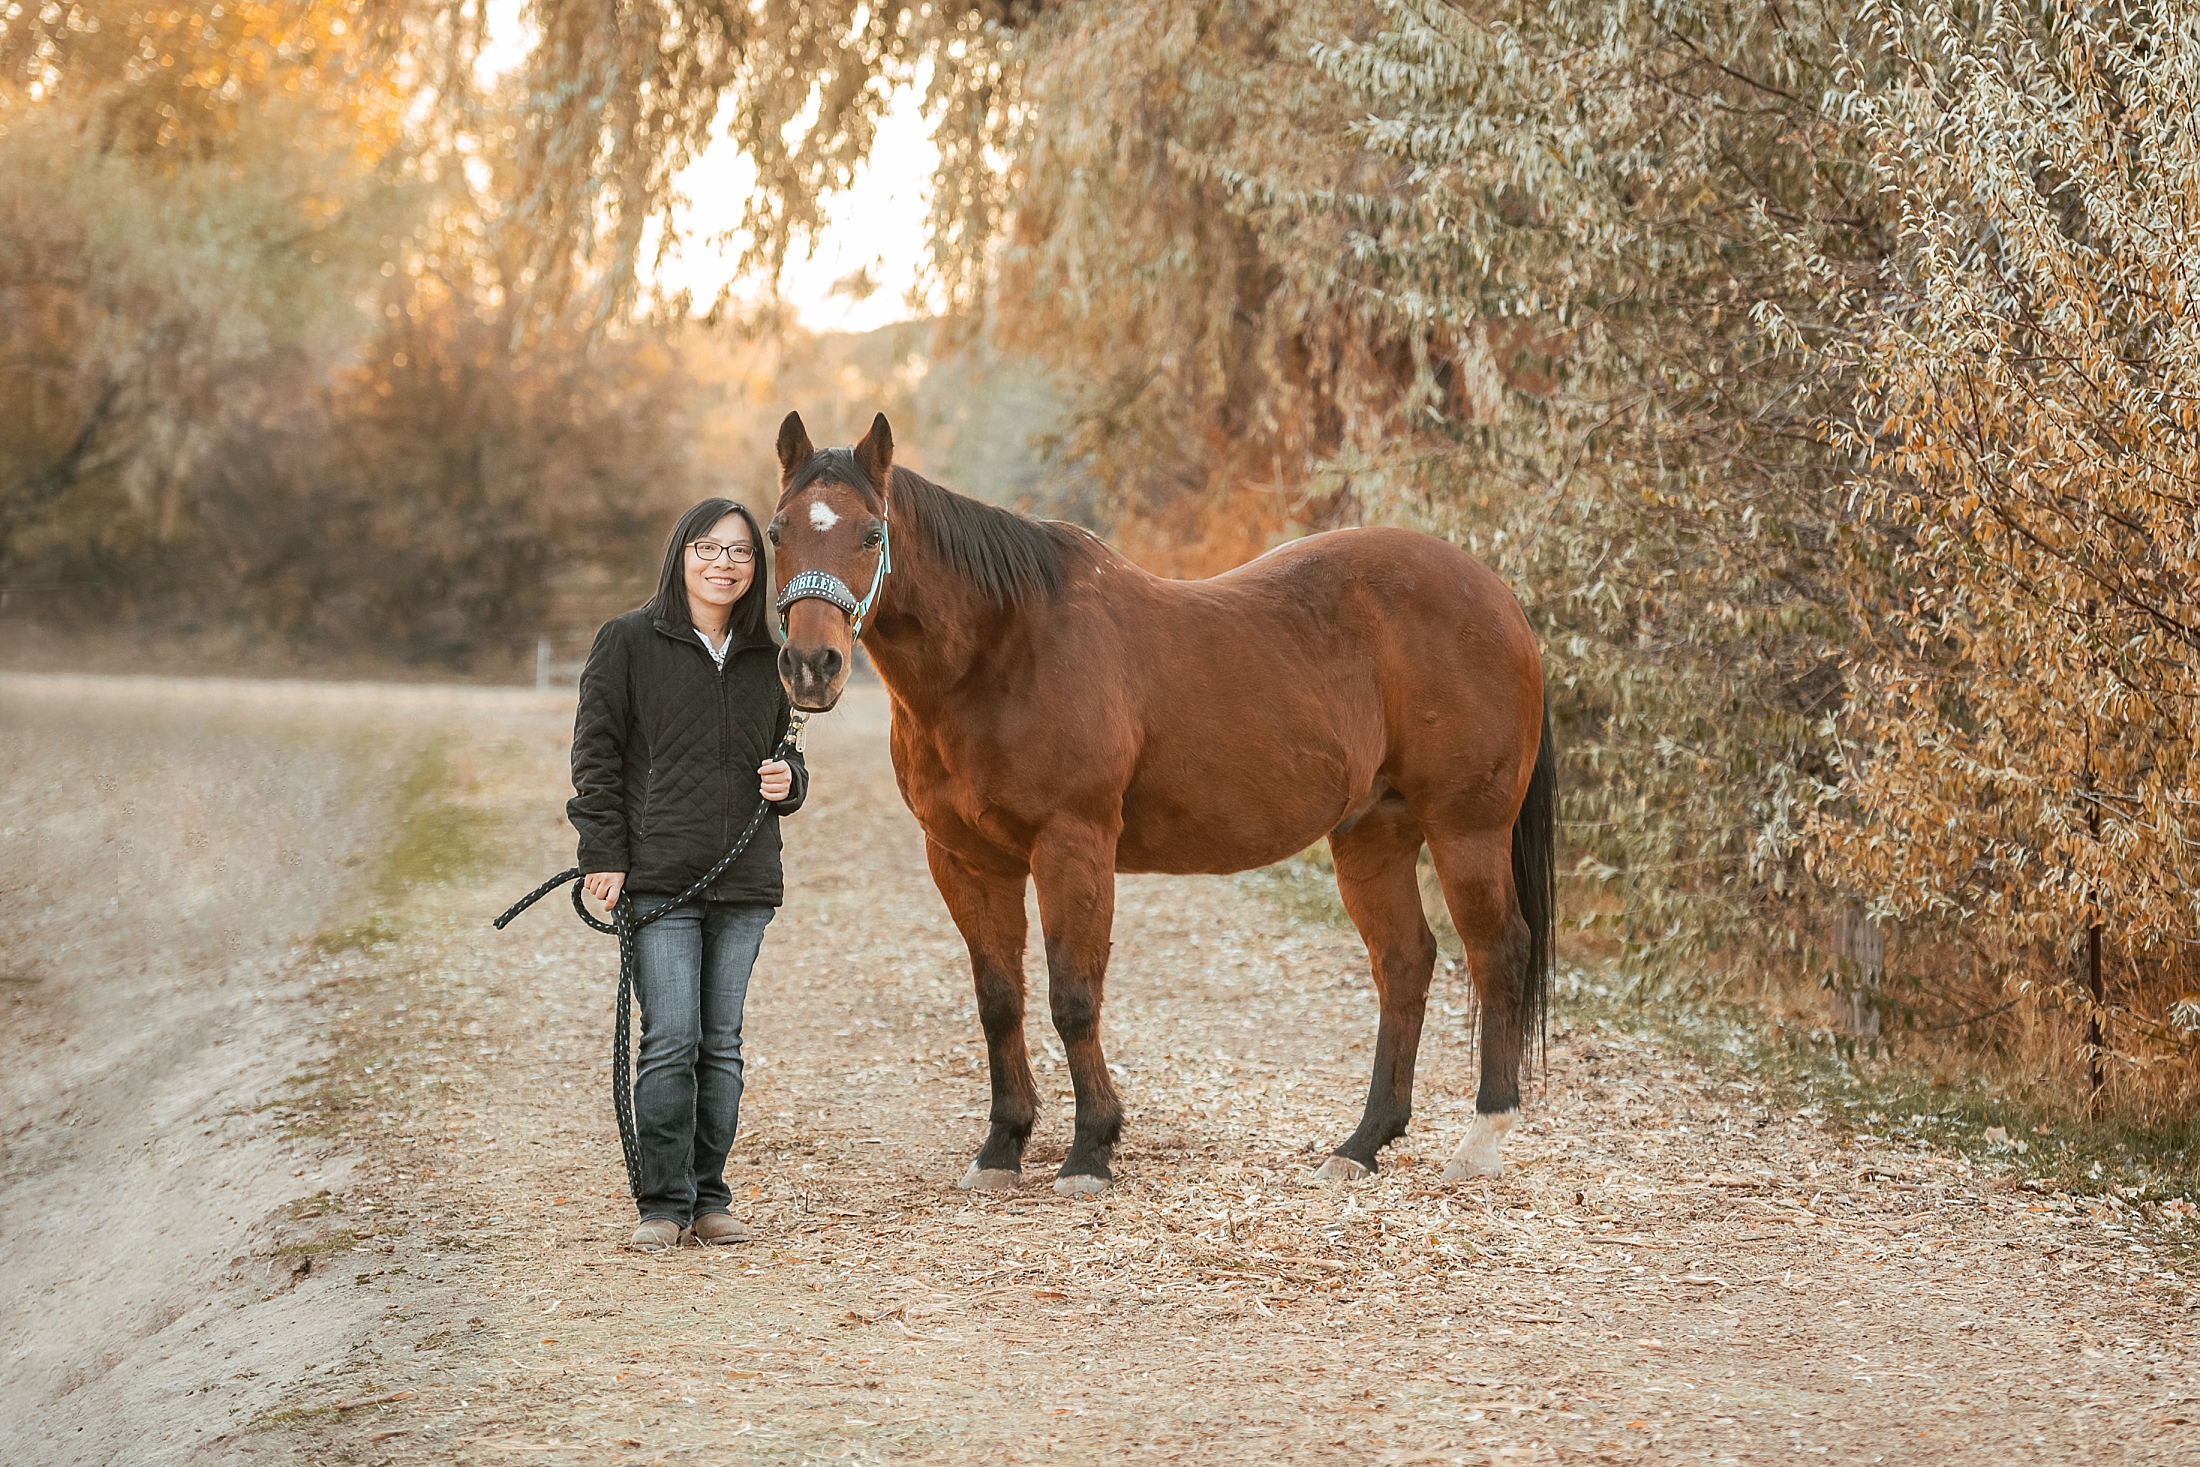 Asian equestrian standing with her horse in the fall leaves